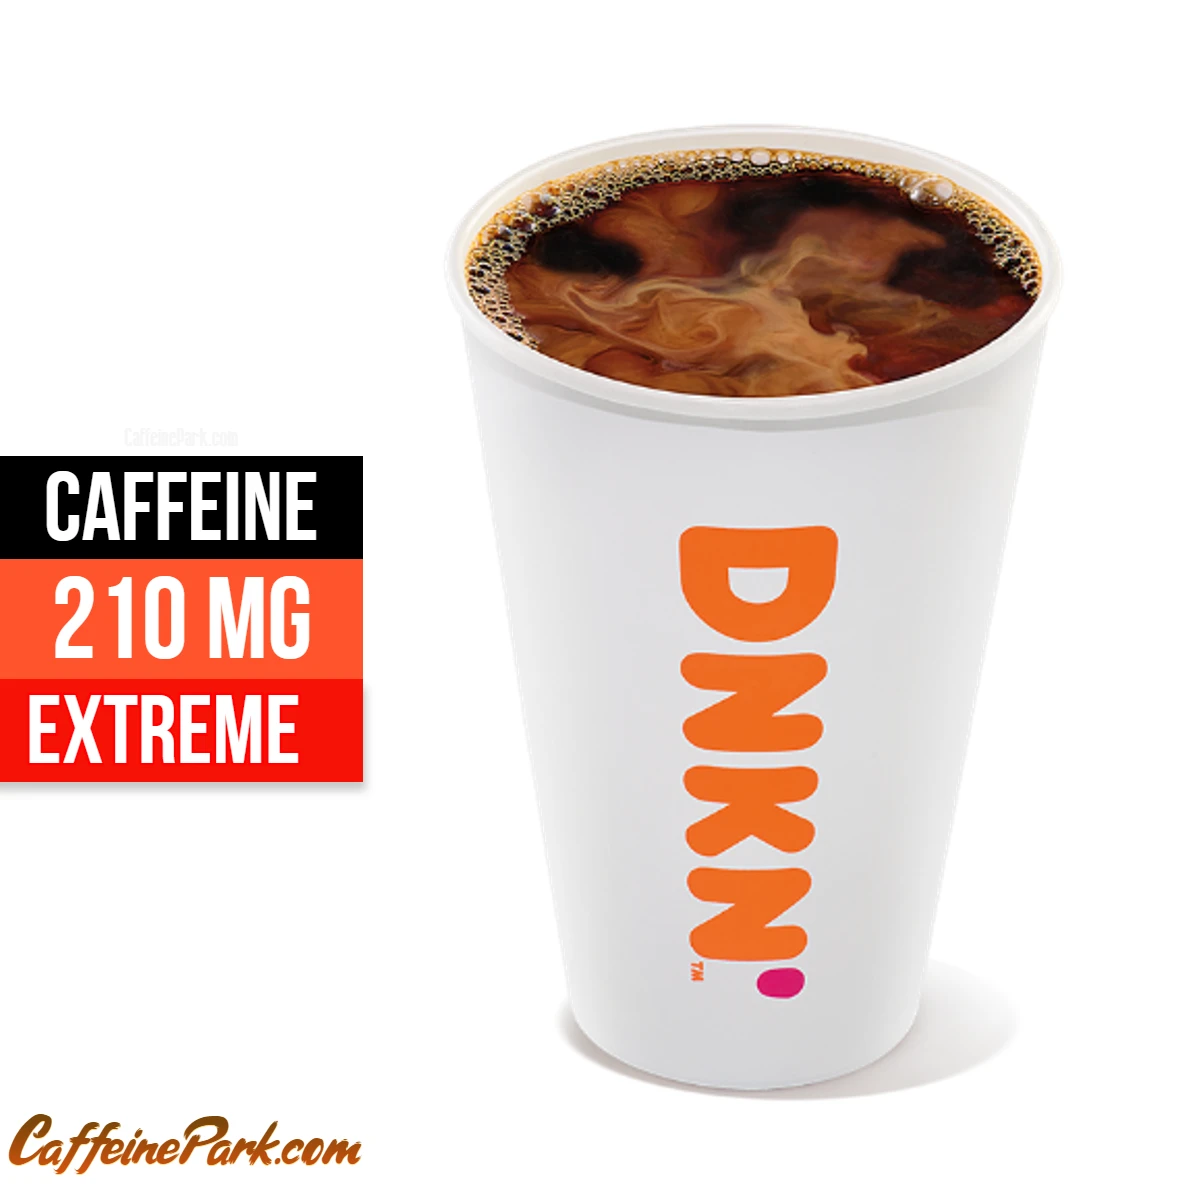 How Much Caffeine is in a Dunkin' Donuts Brewed Coffee?